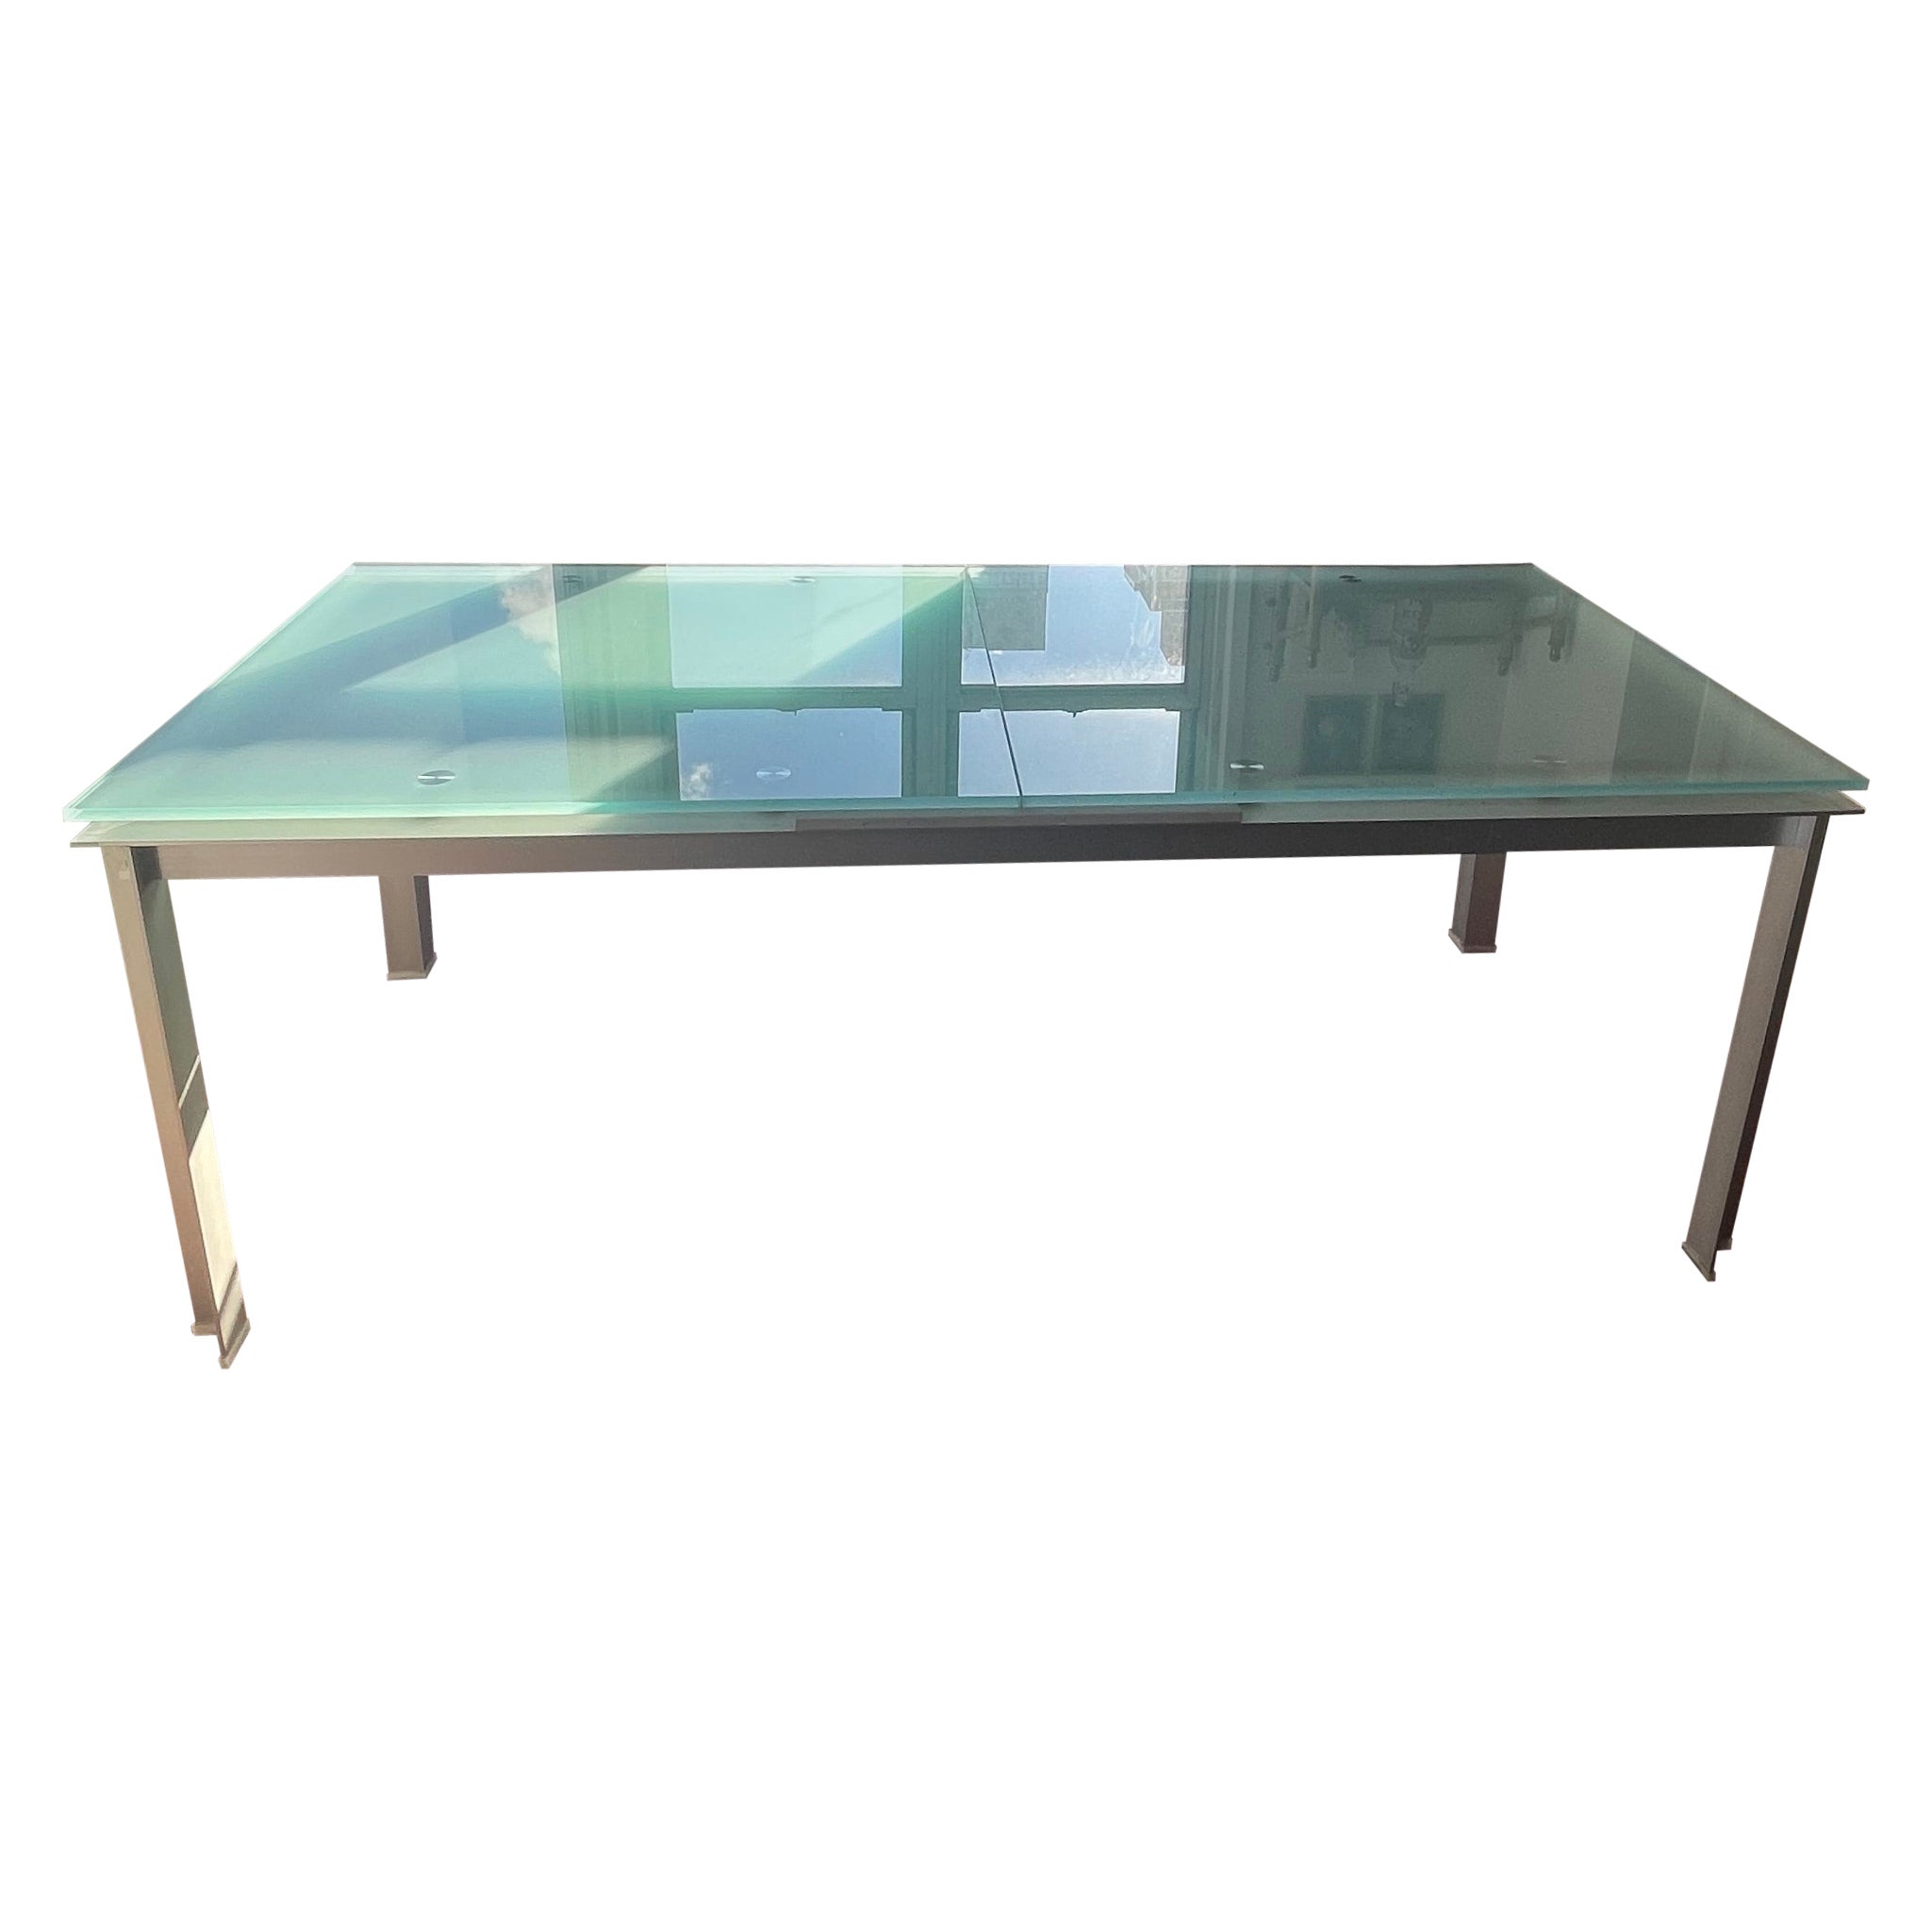 Piva Aluminum & Glass Expandable Dining Table Atavola 20th Century Contemporary For Sale